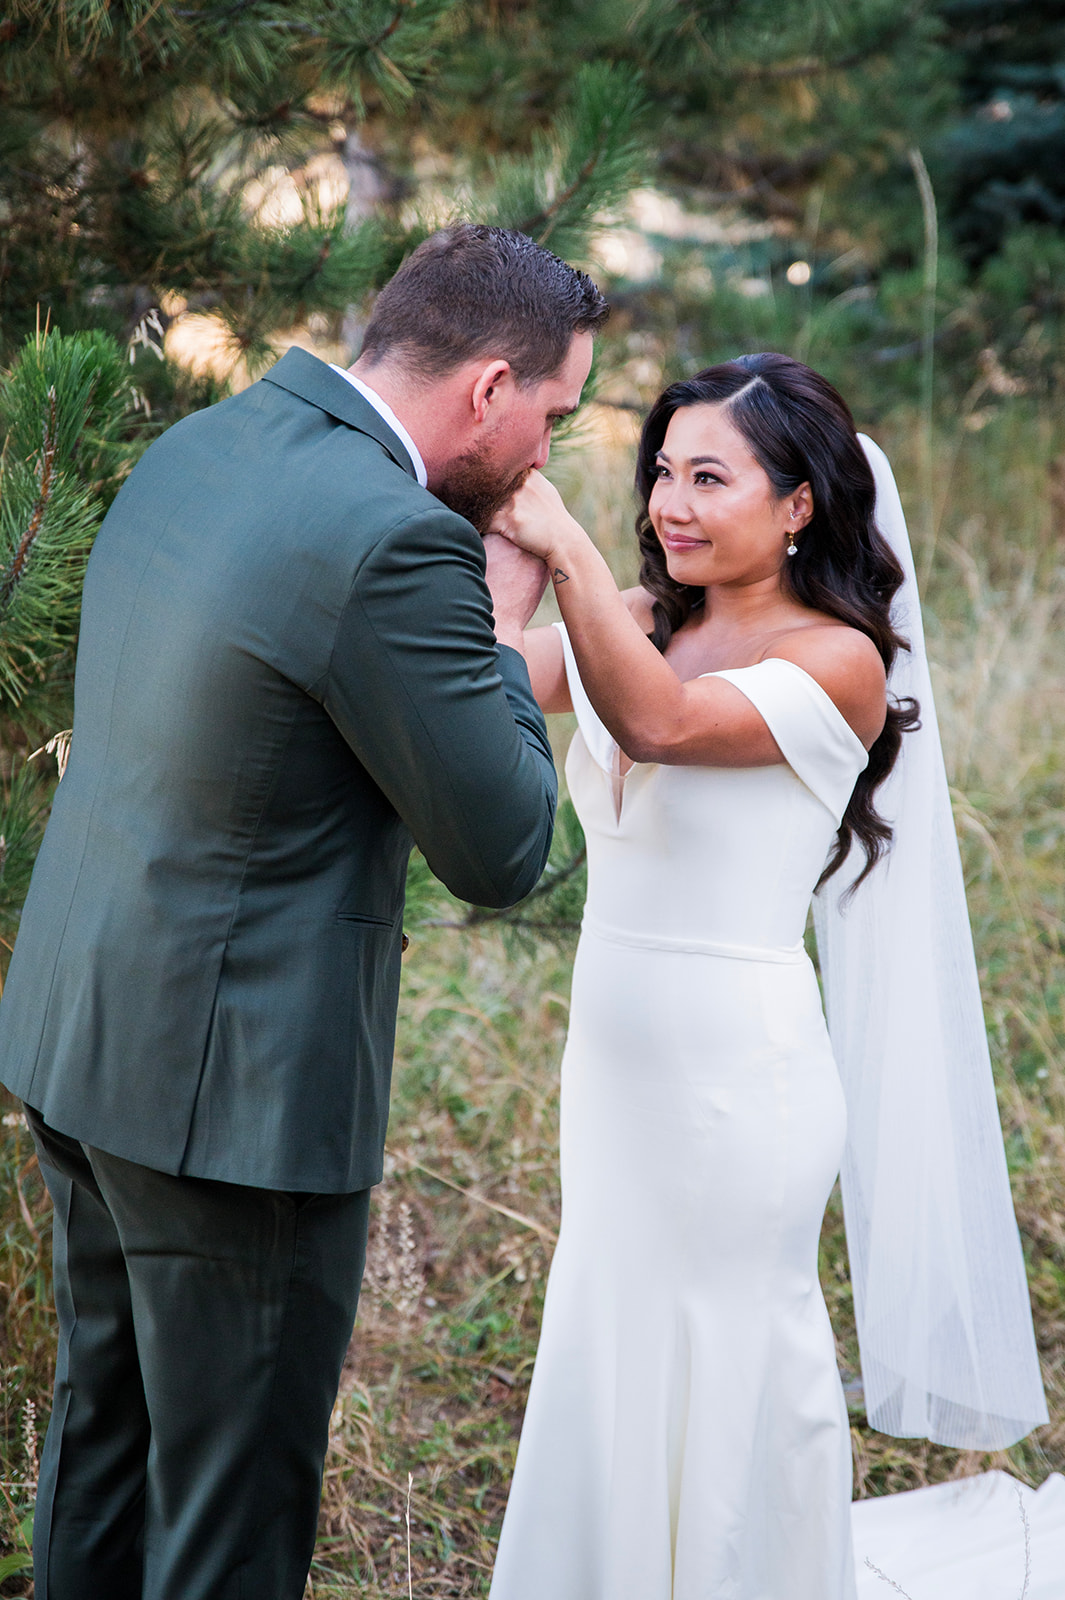 A groom romantically kisses his bride on the hand, captured by Denver wedding photographer, Two One Photography.